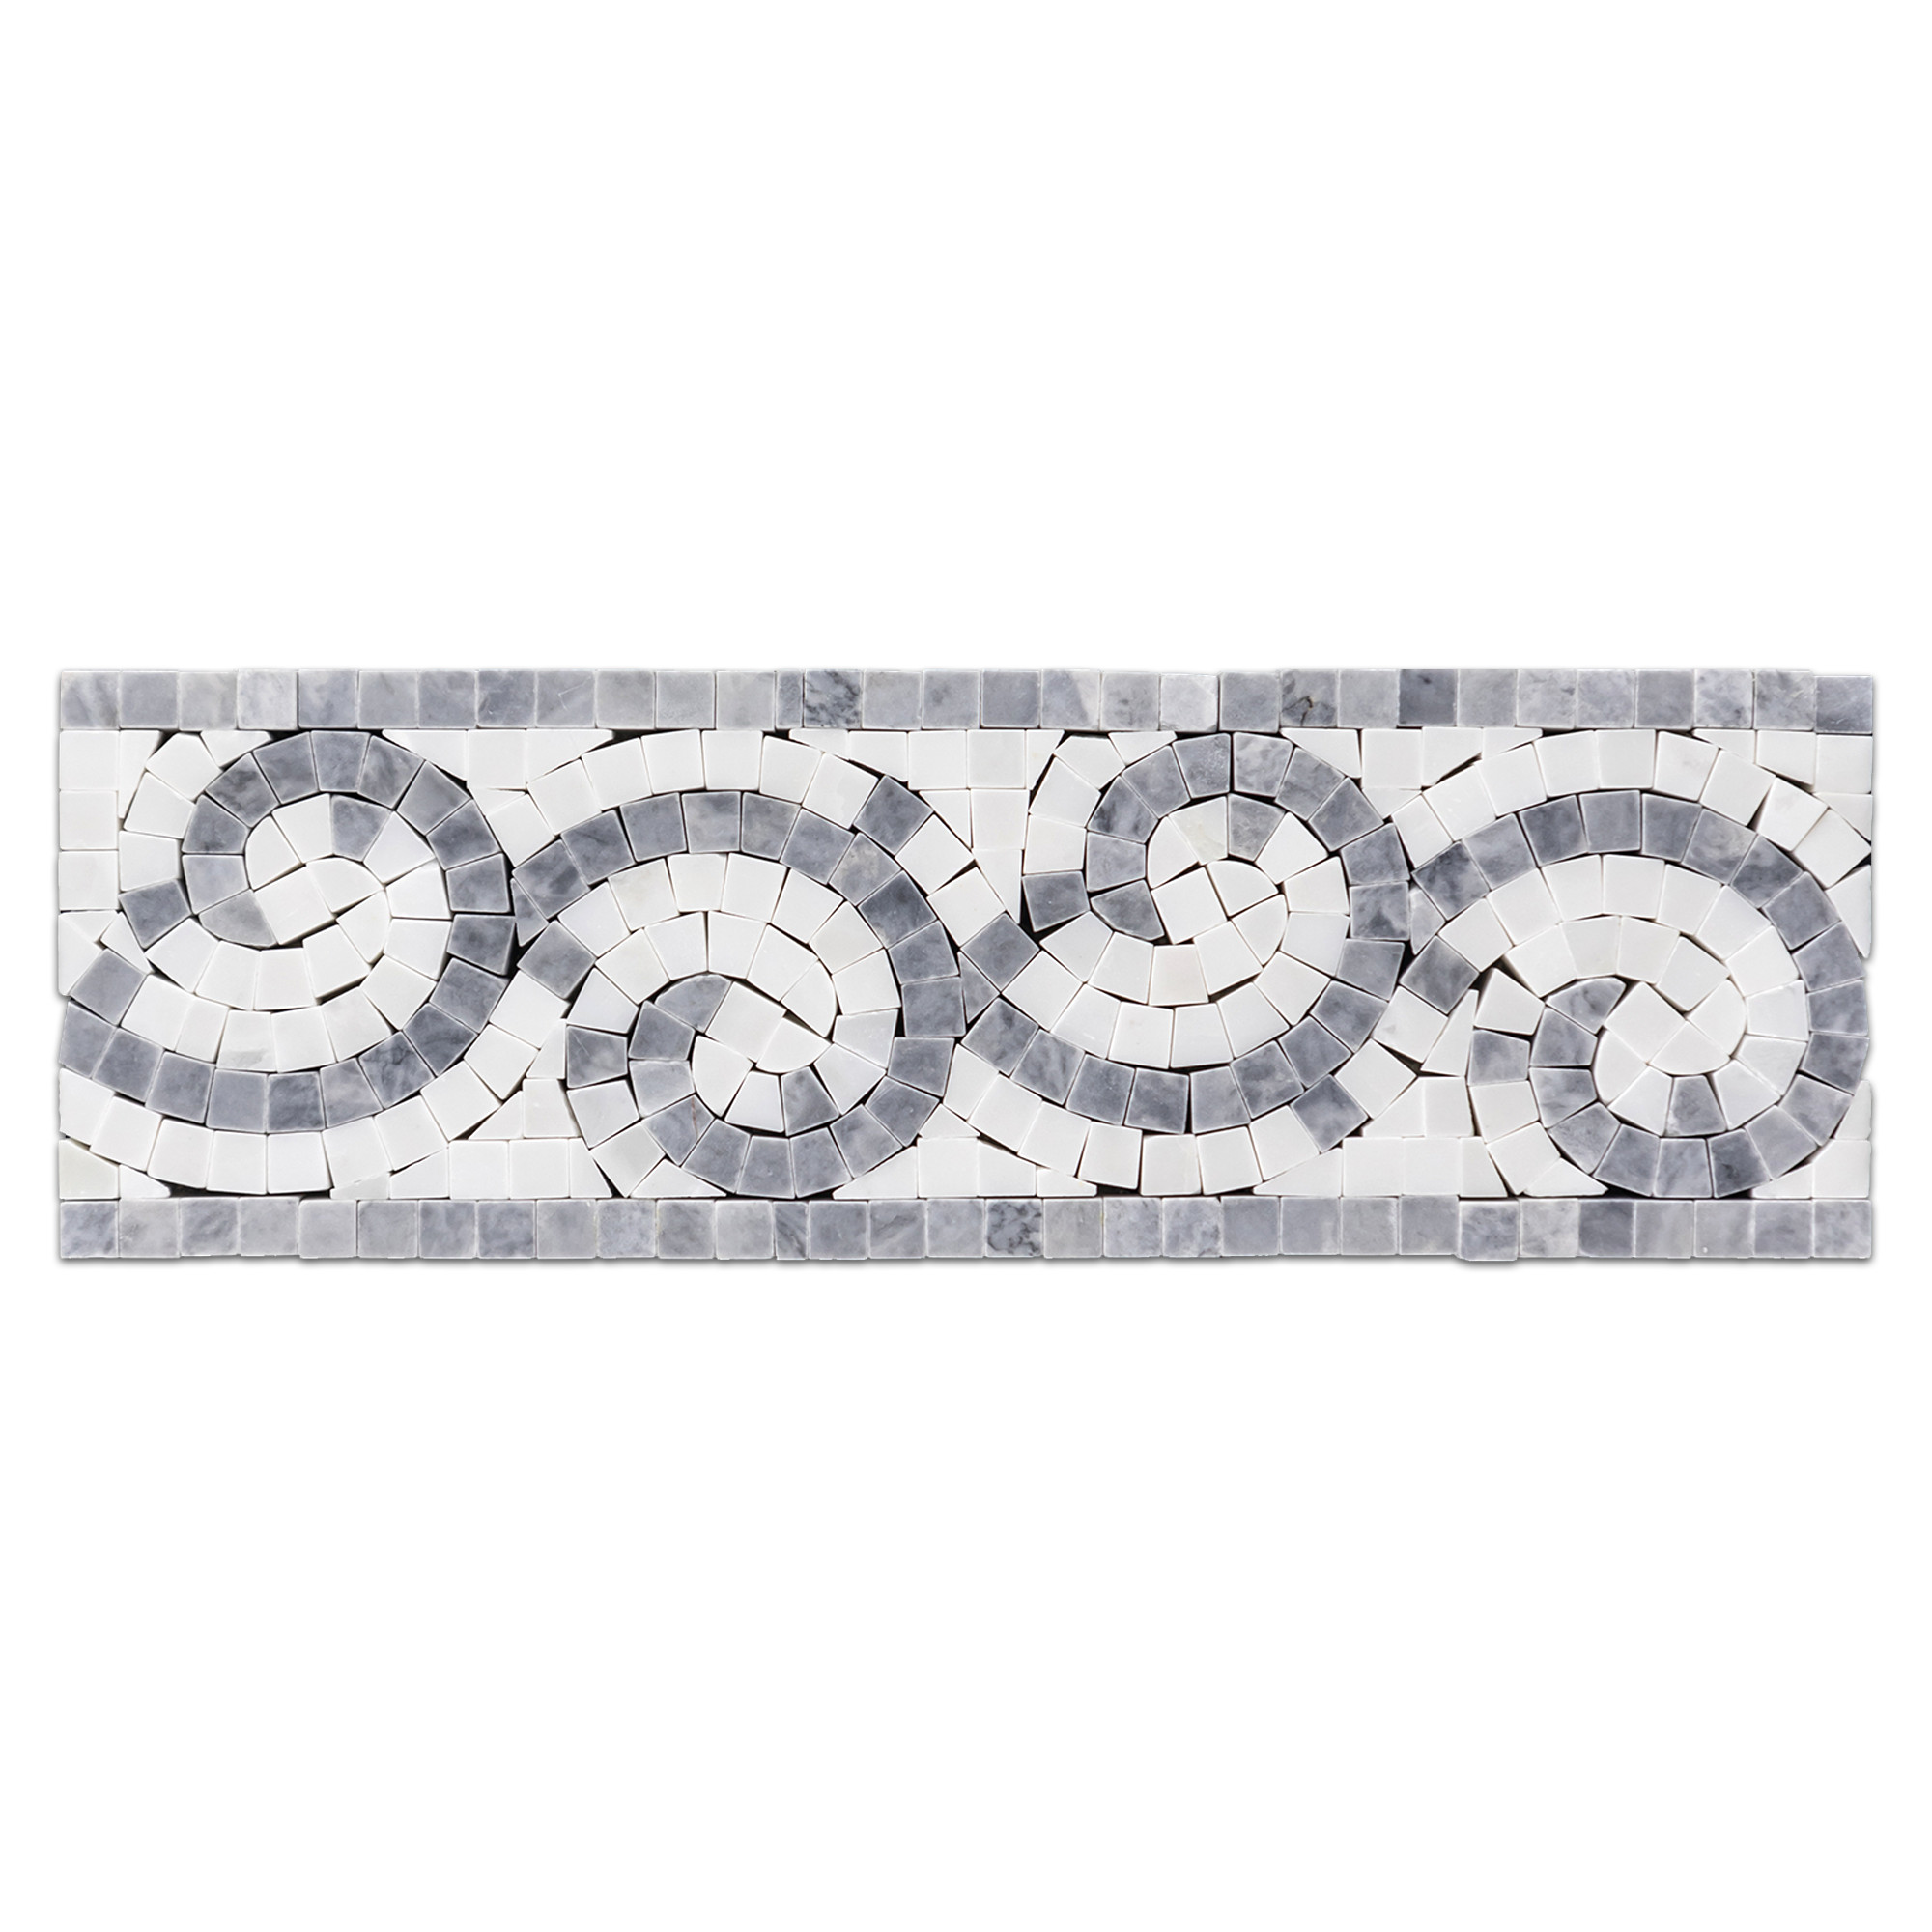 Elon Pacific Gray Pearl White Marble Wave Border Mosaic 4x12x0.375 Honed AM1004H Surface Group International Product